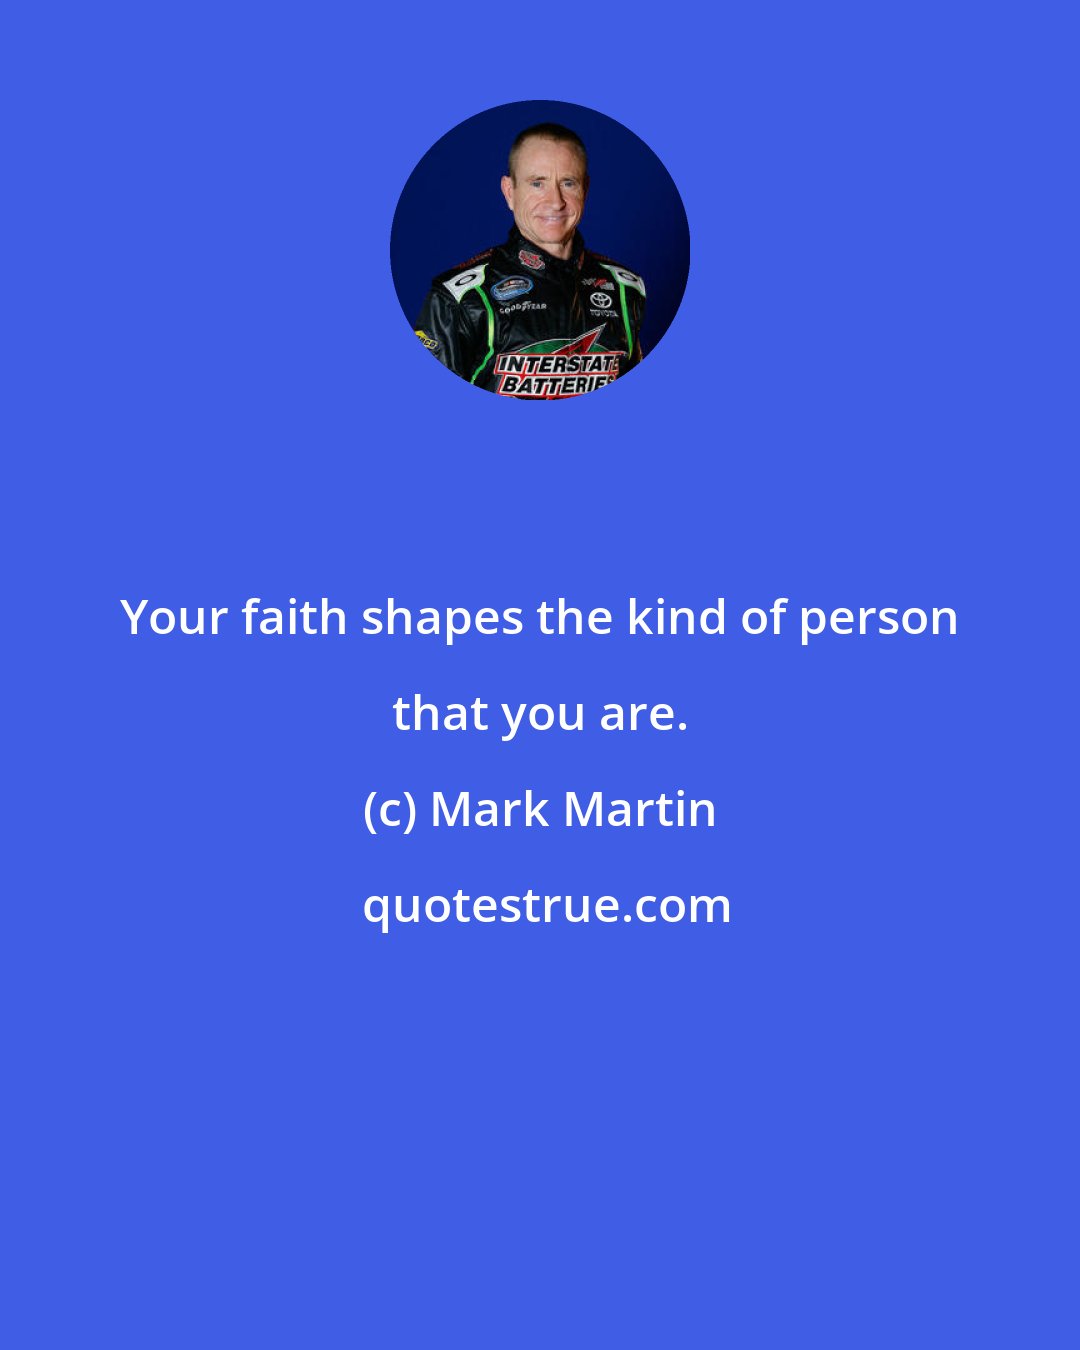 Mark Martin: Your faith shapes the kind of person that you are.